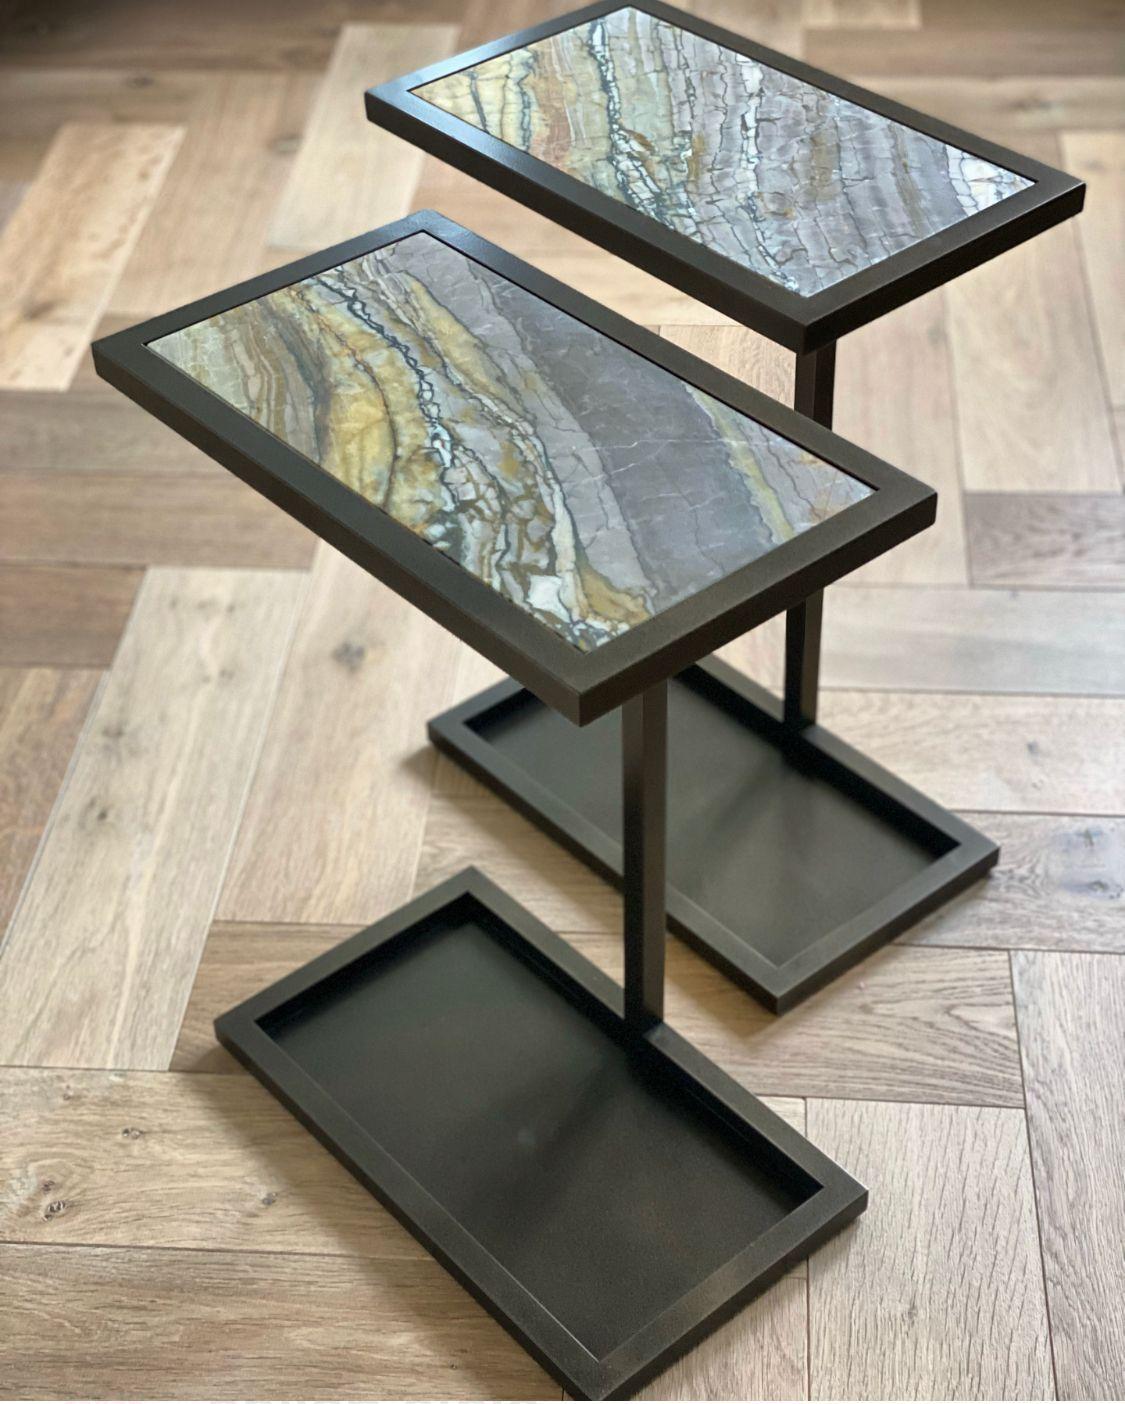 The Martinez table with two shelves boasts an architectural aesthetic and can stand confidently as a sculpture on its own. Its simple and sleek design exudes luxury and subtle glamour. The table comes in various finishes including powder-coated